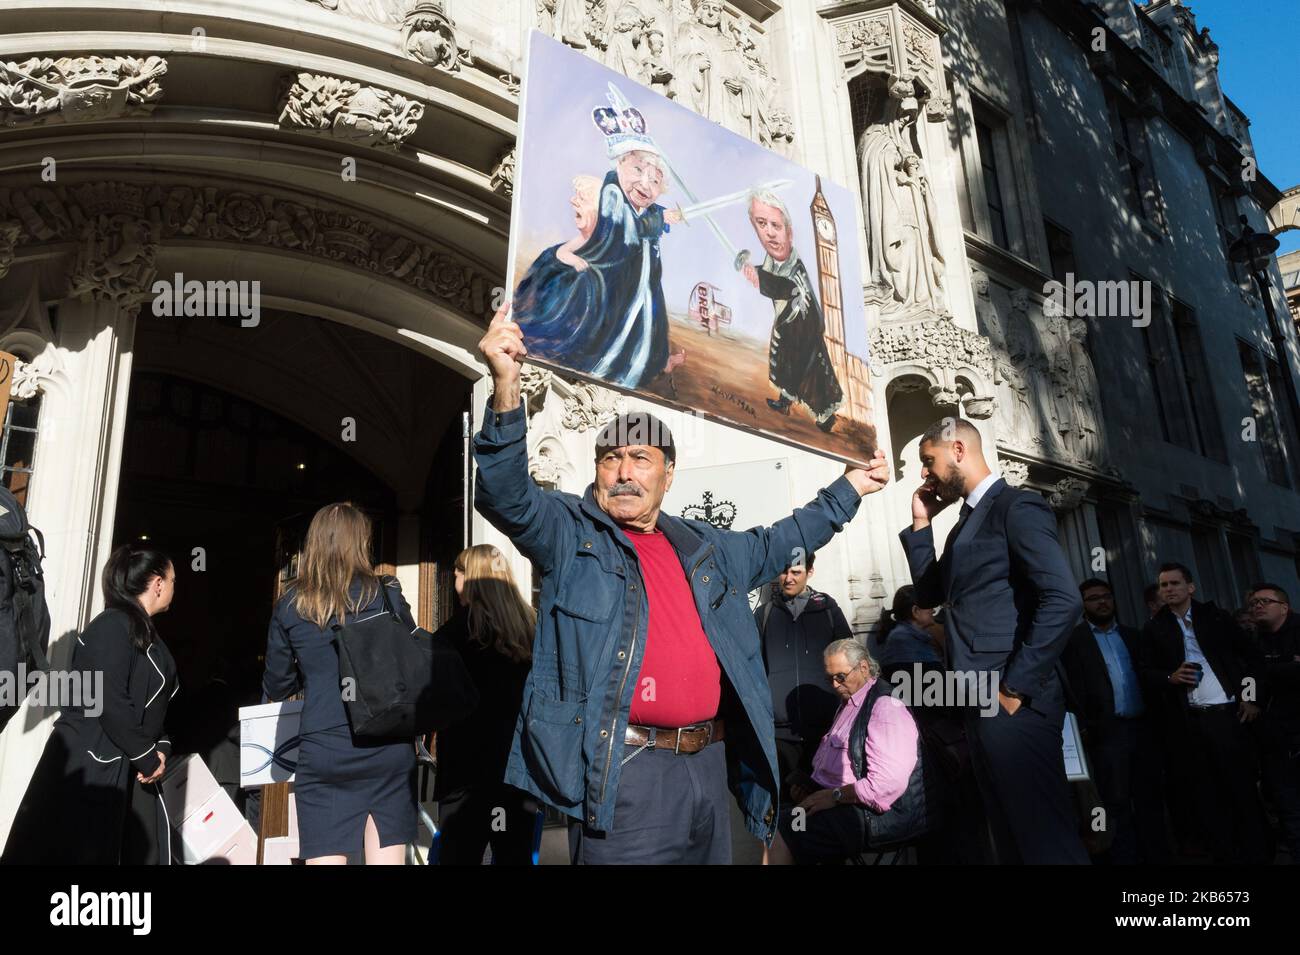 Satirical artist Kaya Mar poses with his artwork depicting (L-R) British Prime Minister Boris Johnson hiding behind Queen Elizabeth II who is engaged in a sword fight with Speaker of the House of Commons John Bercow outside the Supreme Court on 17 September, 2019 in London, England. Today, the Supreme Court judges begin a three-day hearing over the claim that Prime Minister Boris Johnson acted unlawfully in advising the Queen to prorogue parliament for five weeks in order to prevent MPs from debating the Brexit crisis. (Photo by WIktor Szymanowicz/NurPhoto) Stock Photo